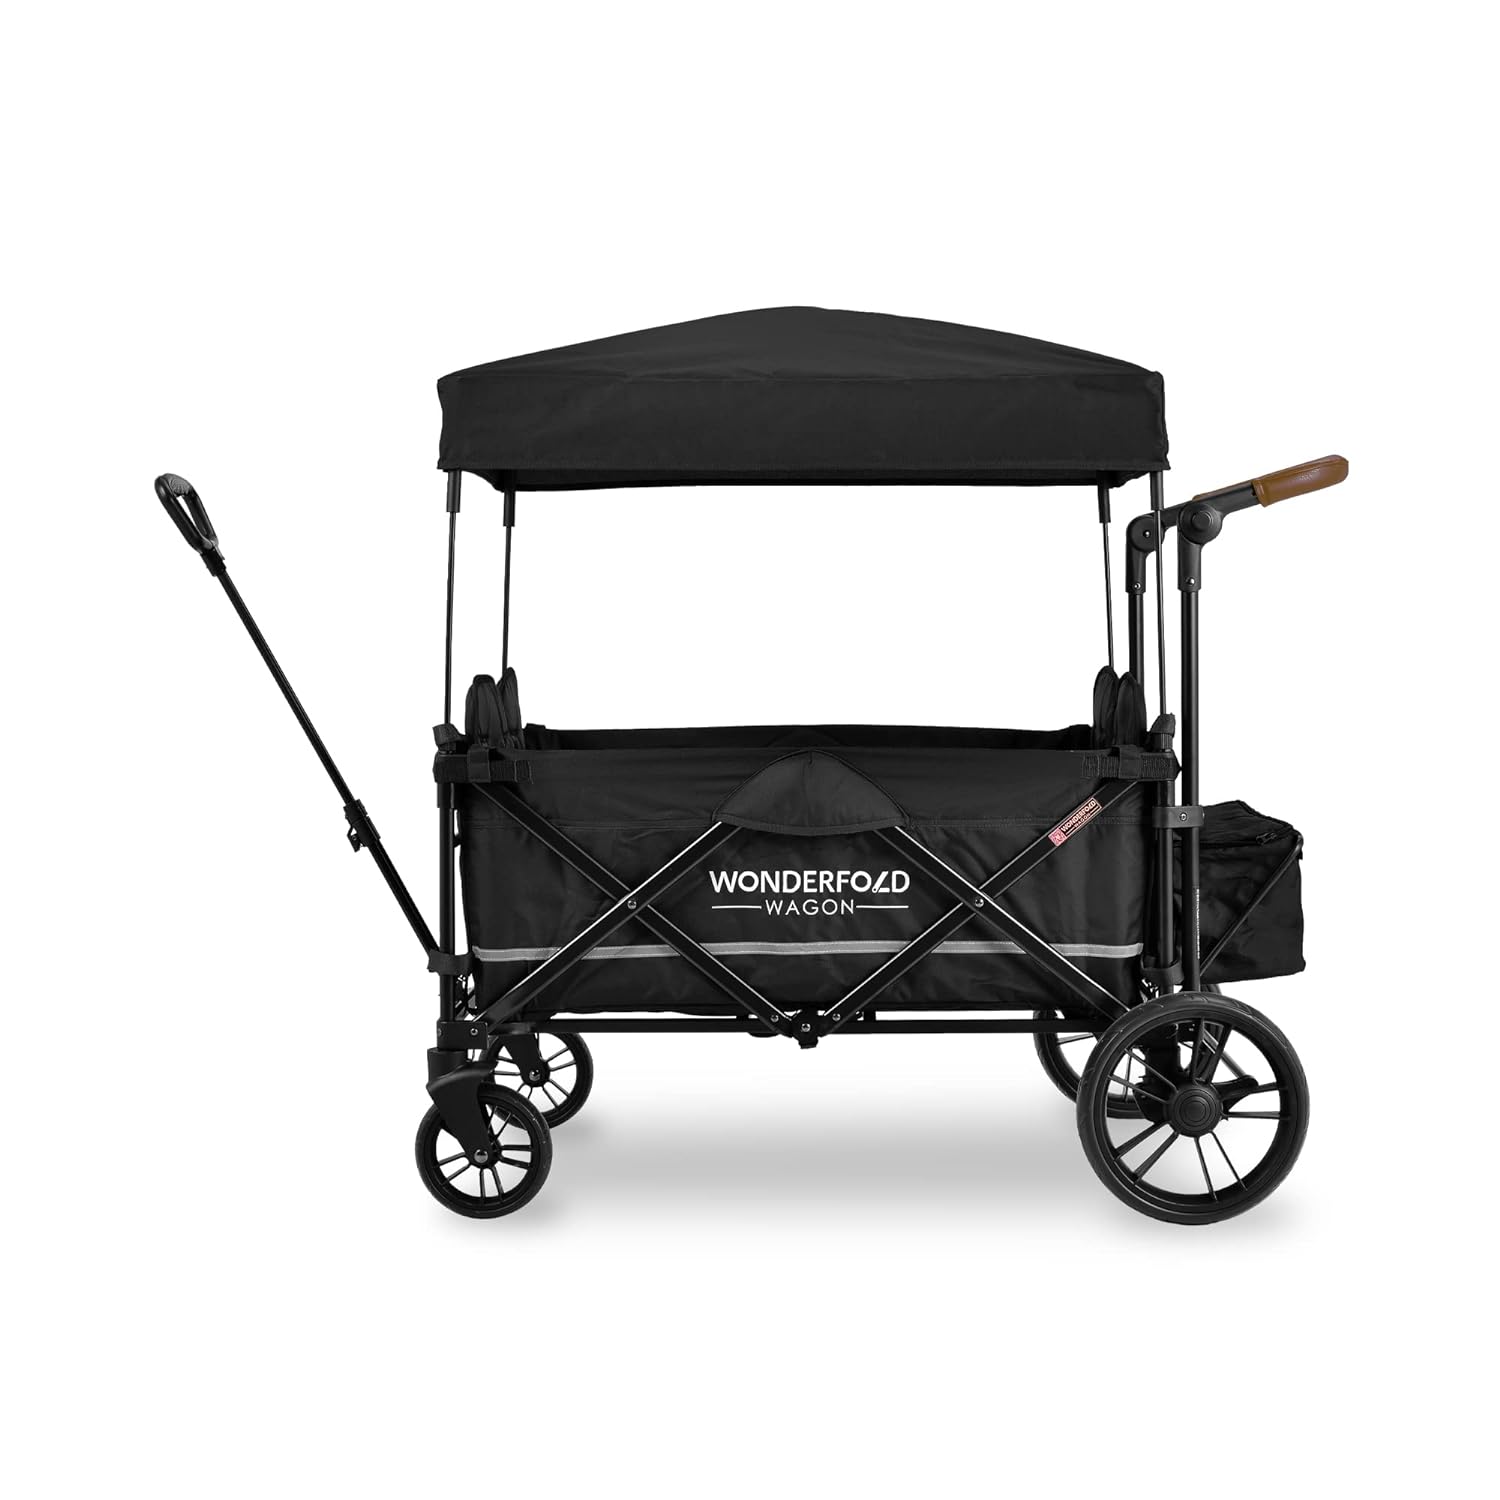 WONDERFOLD X4 Push  Pull Quad Stroller Wagon (4 Seater) Featuring Seats with 5-Point Harnesses, Adjustable Push Handle, and Adjustable/Removable UV-Protection Canopy, Navy - WONDERFOLD X4 Stroller Wagon Review